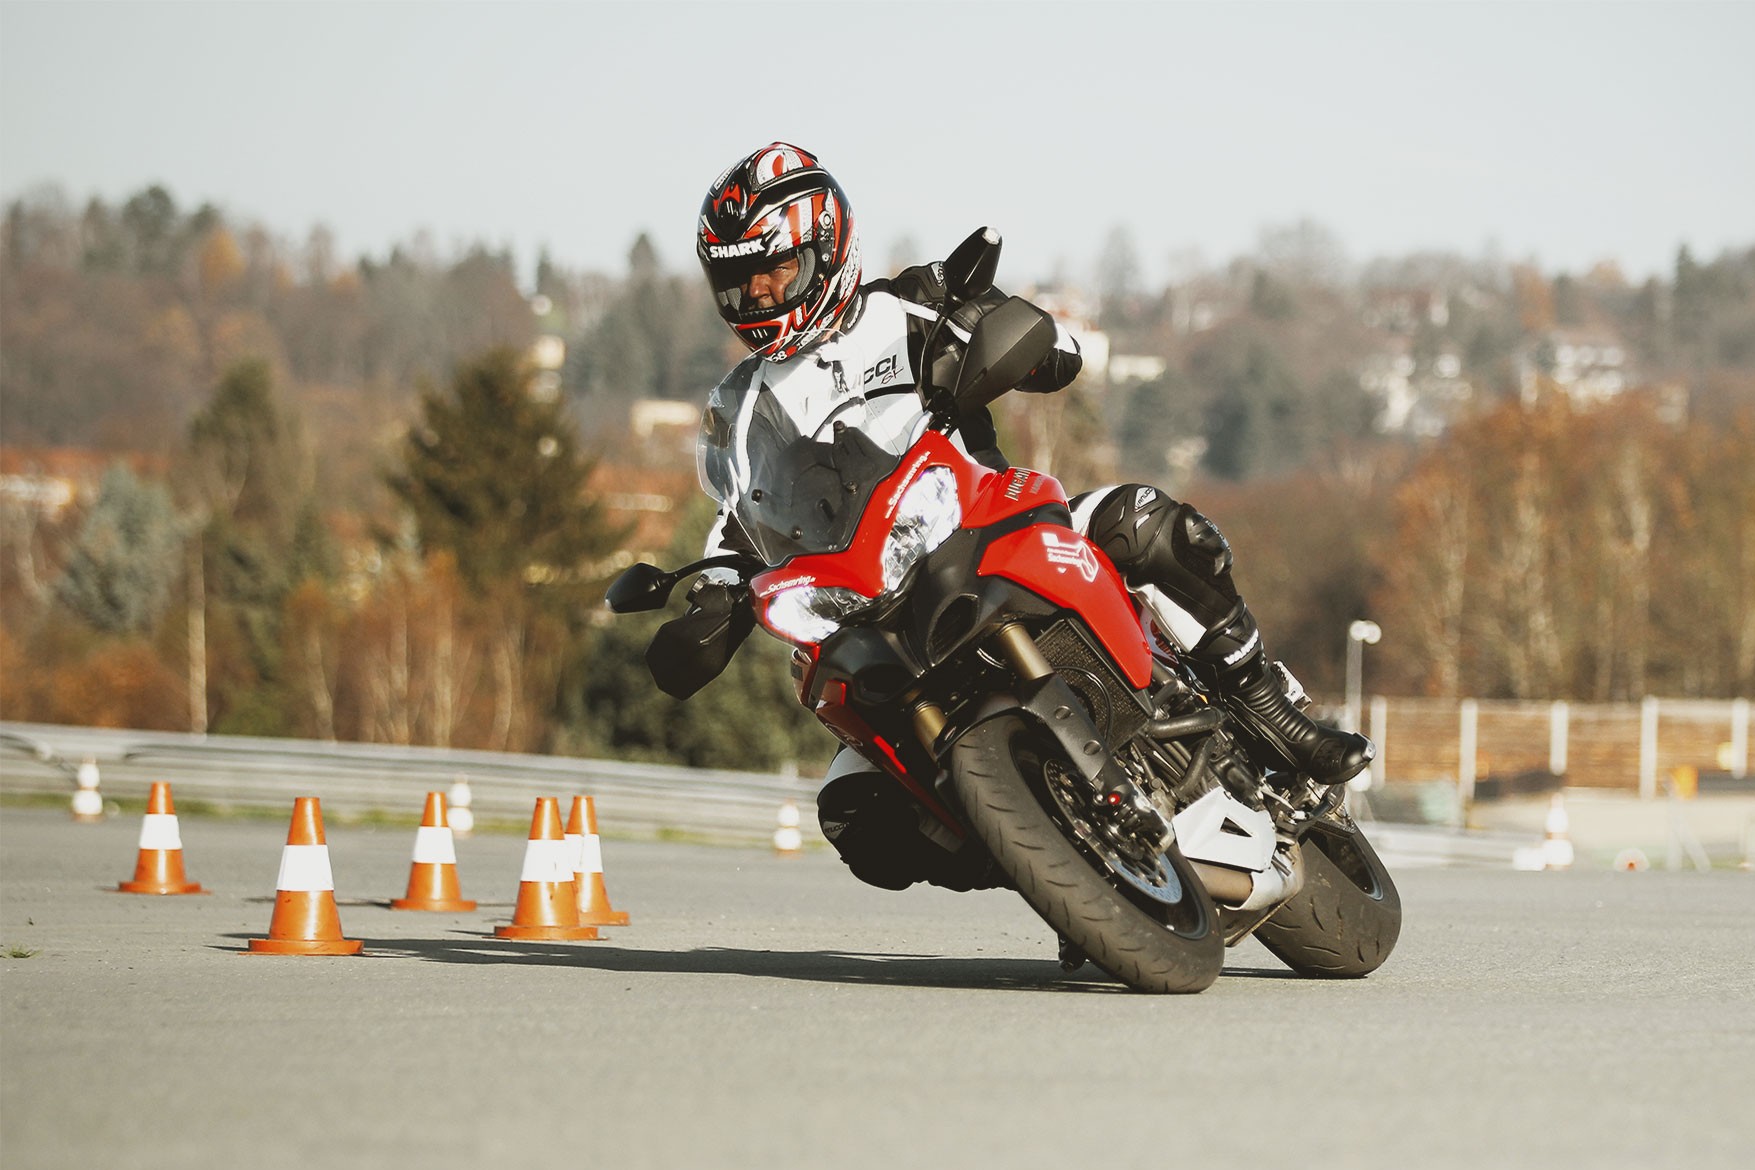 Safety and cornering training